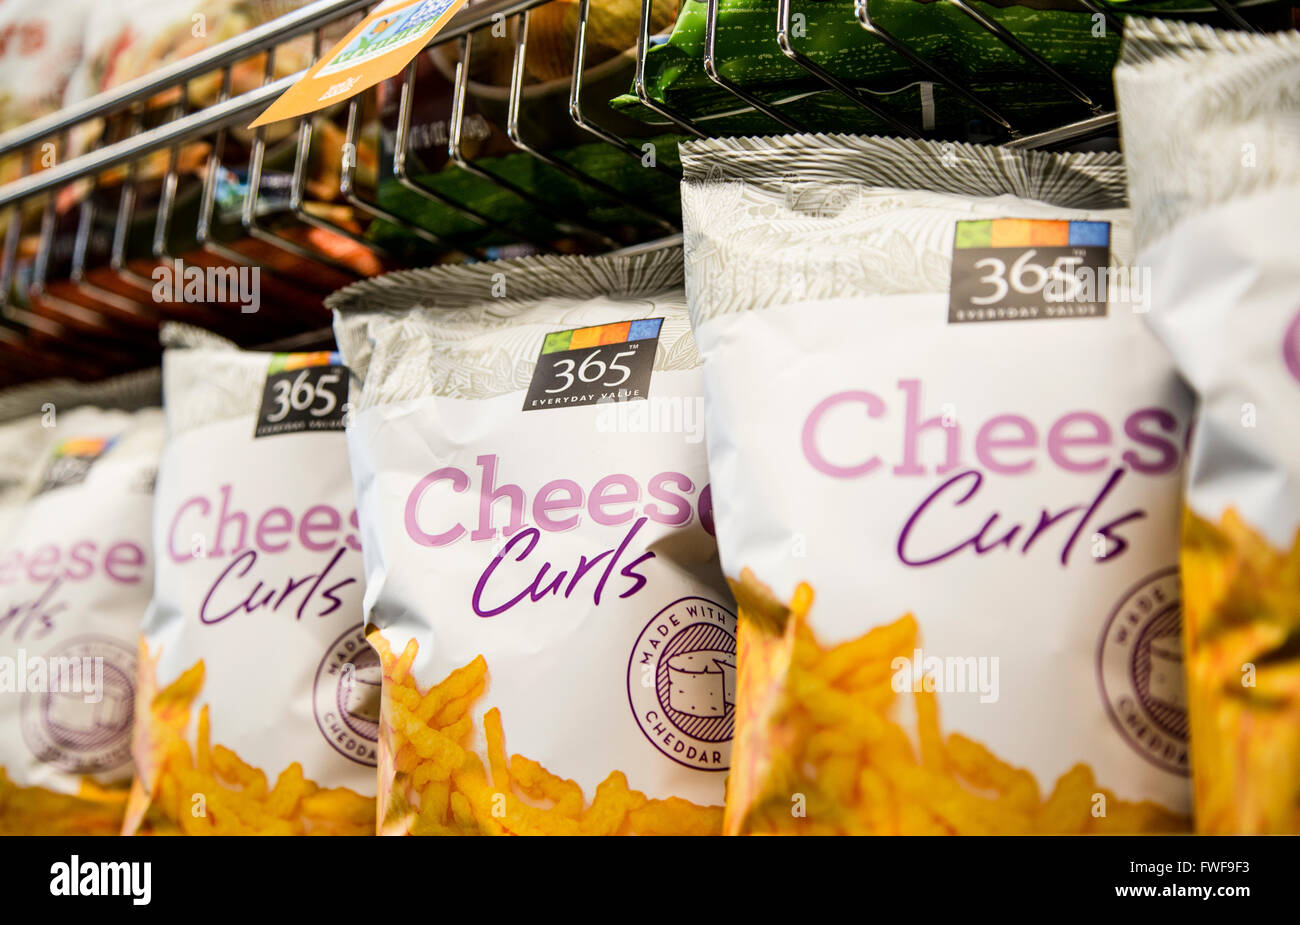 bags of 365 Whole Foods brand cheese curls on a grocery store shelf Stock Photo